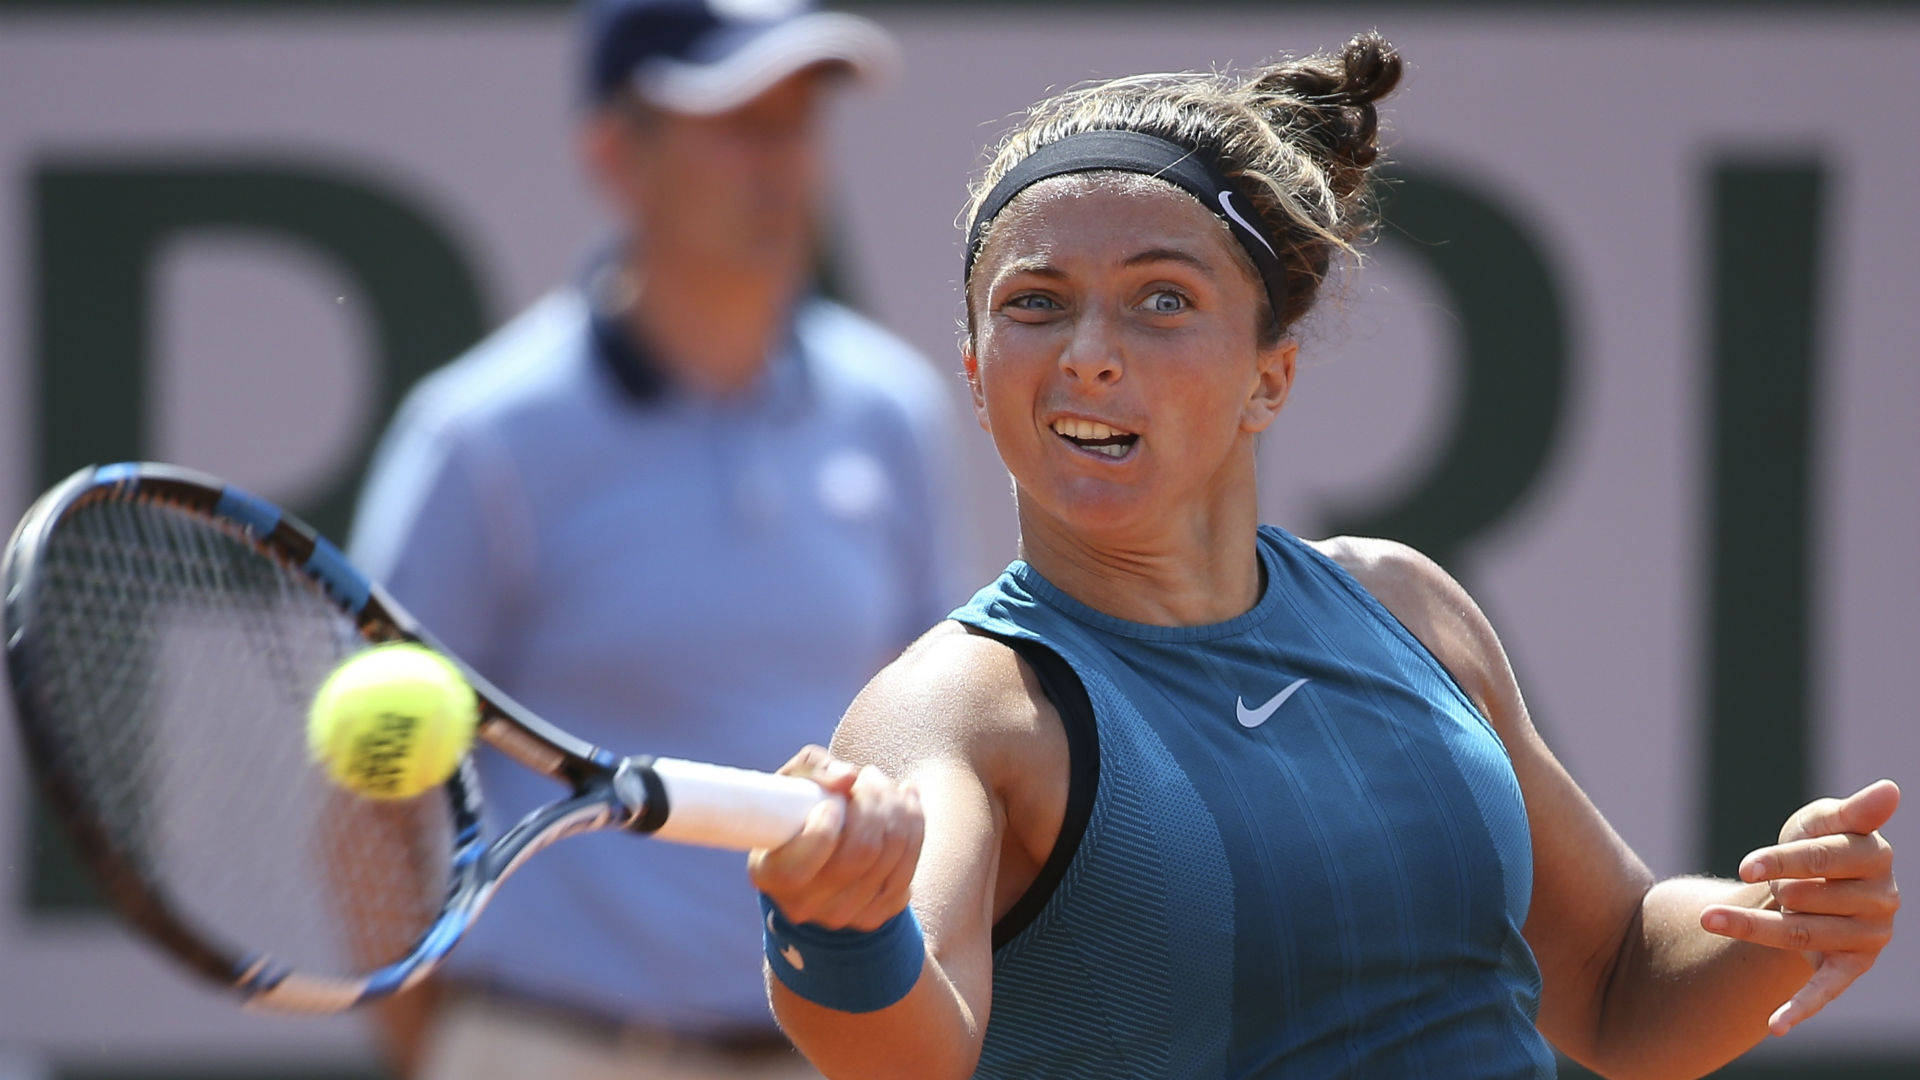 Sara Errani Displaying a Funny Facial Expression on Court Wallpaper